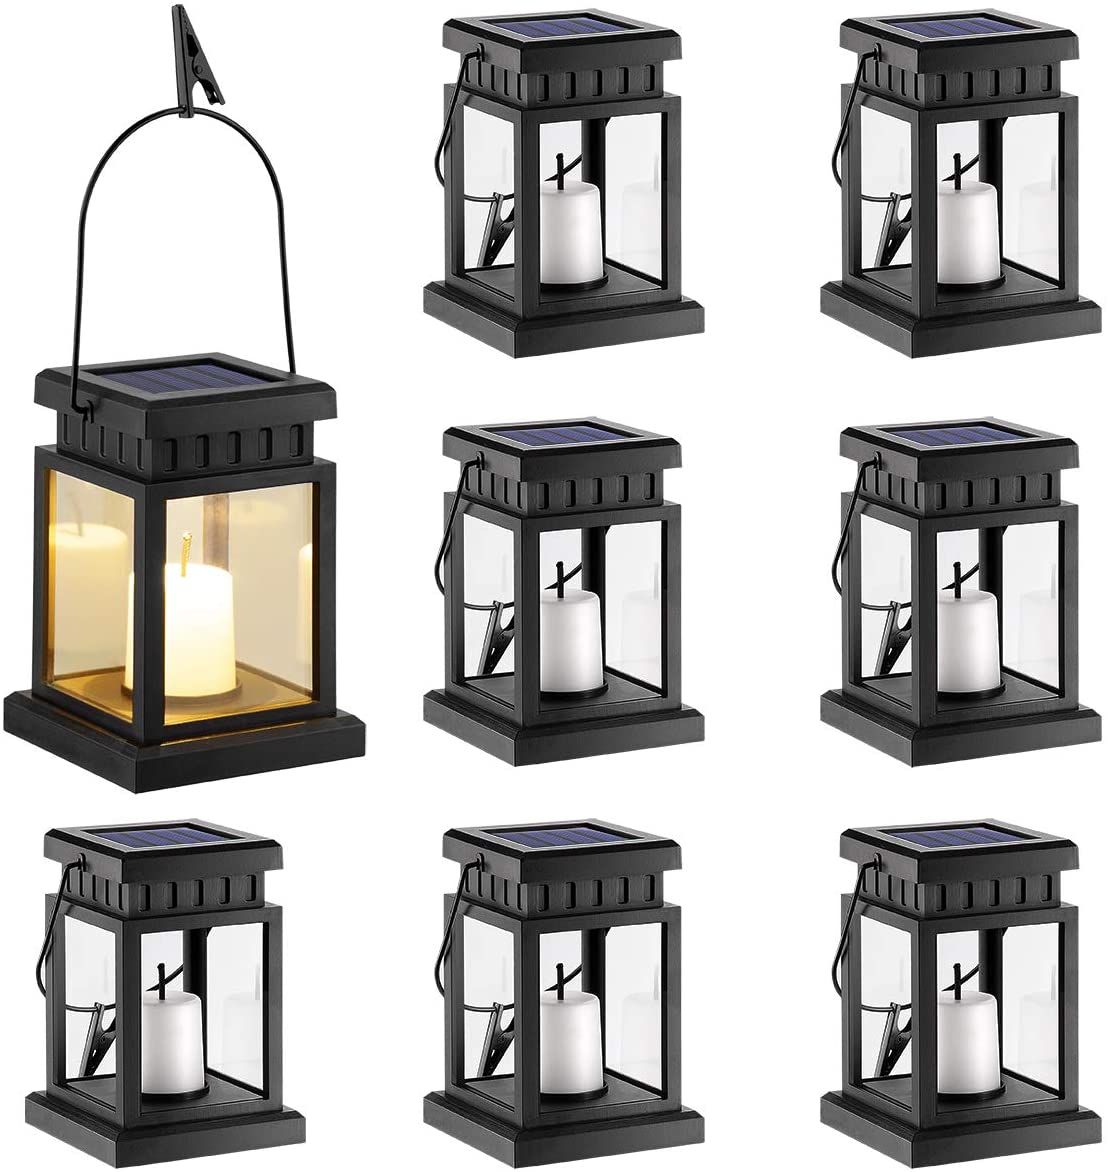 Gigalumi 8 Pack Outdoor Lantern With Solar Power 